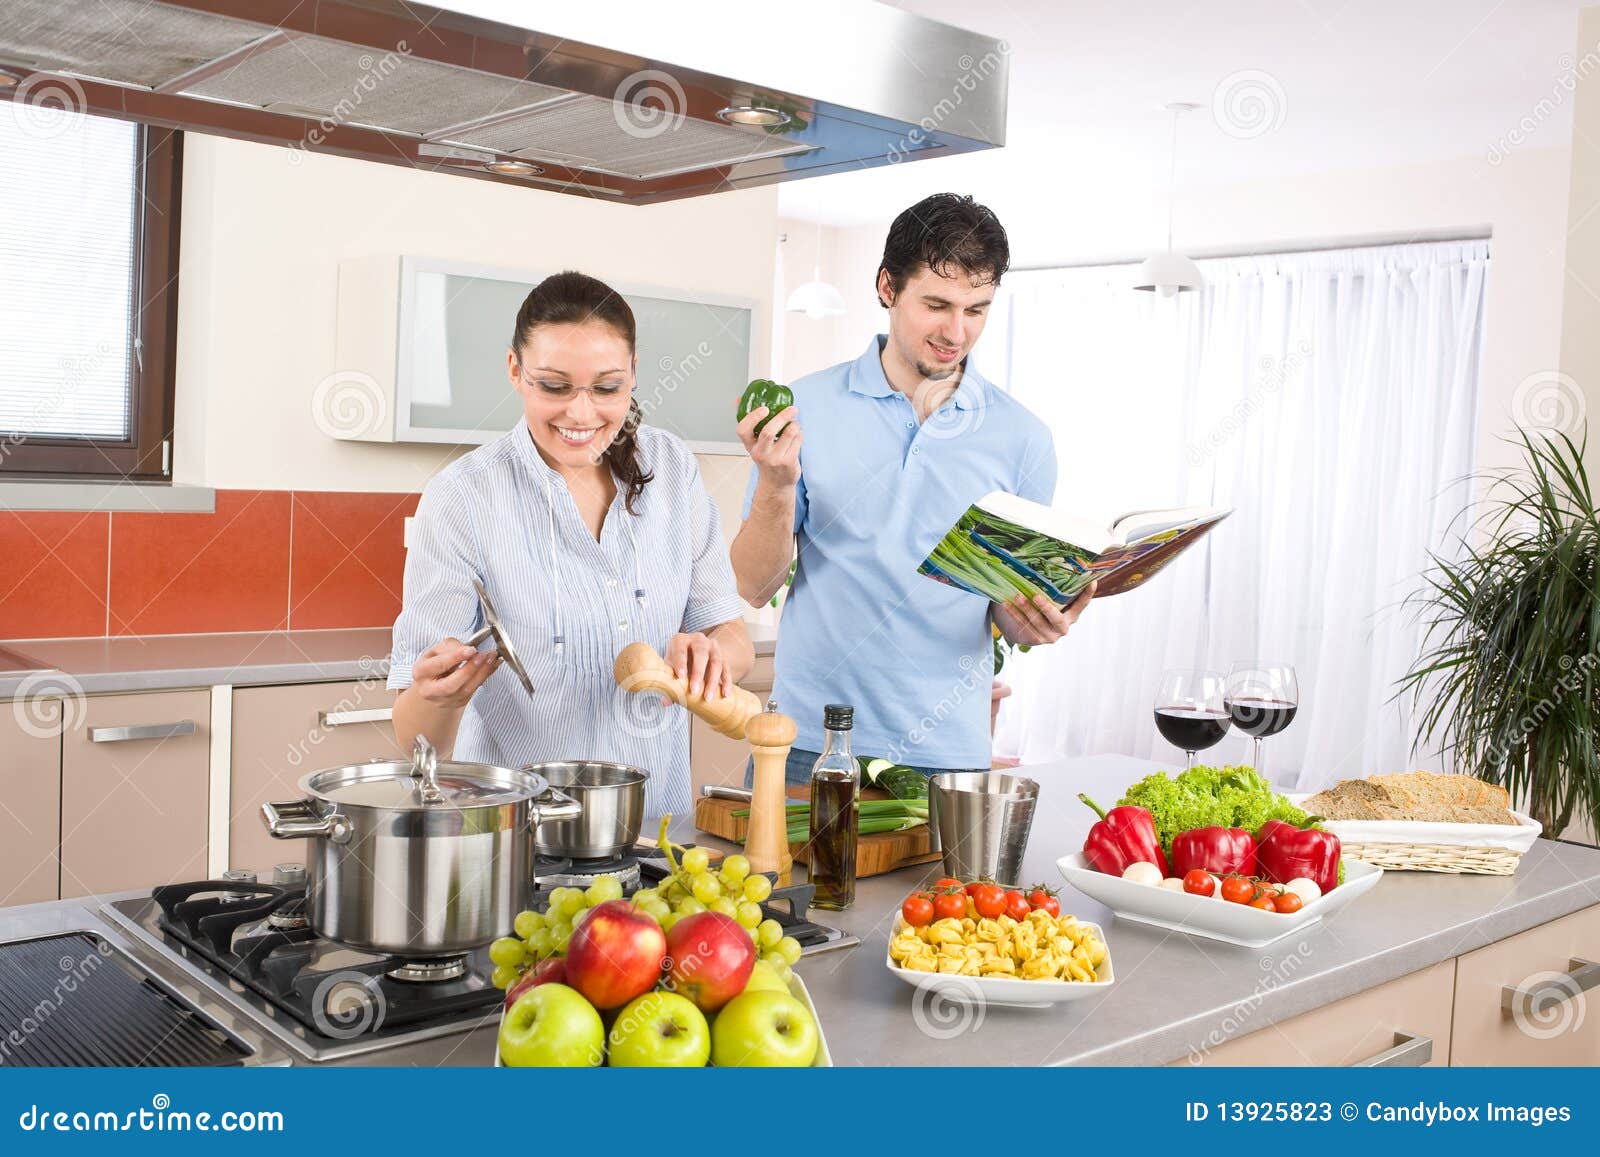 young happy couple cook in kitchen with cookbook